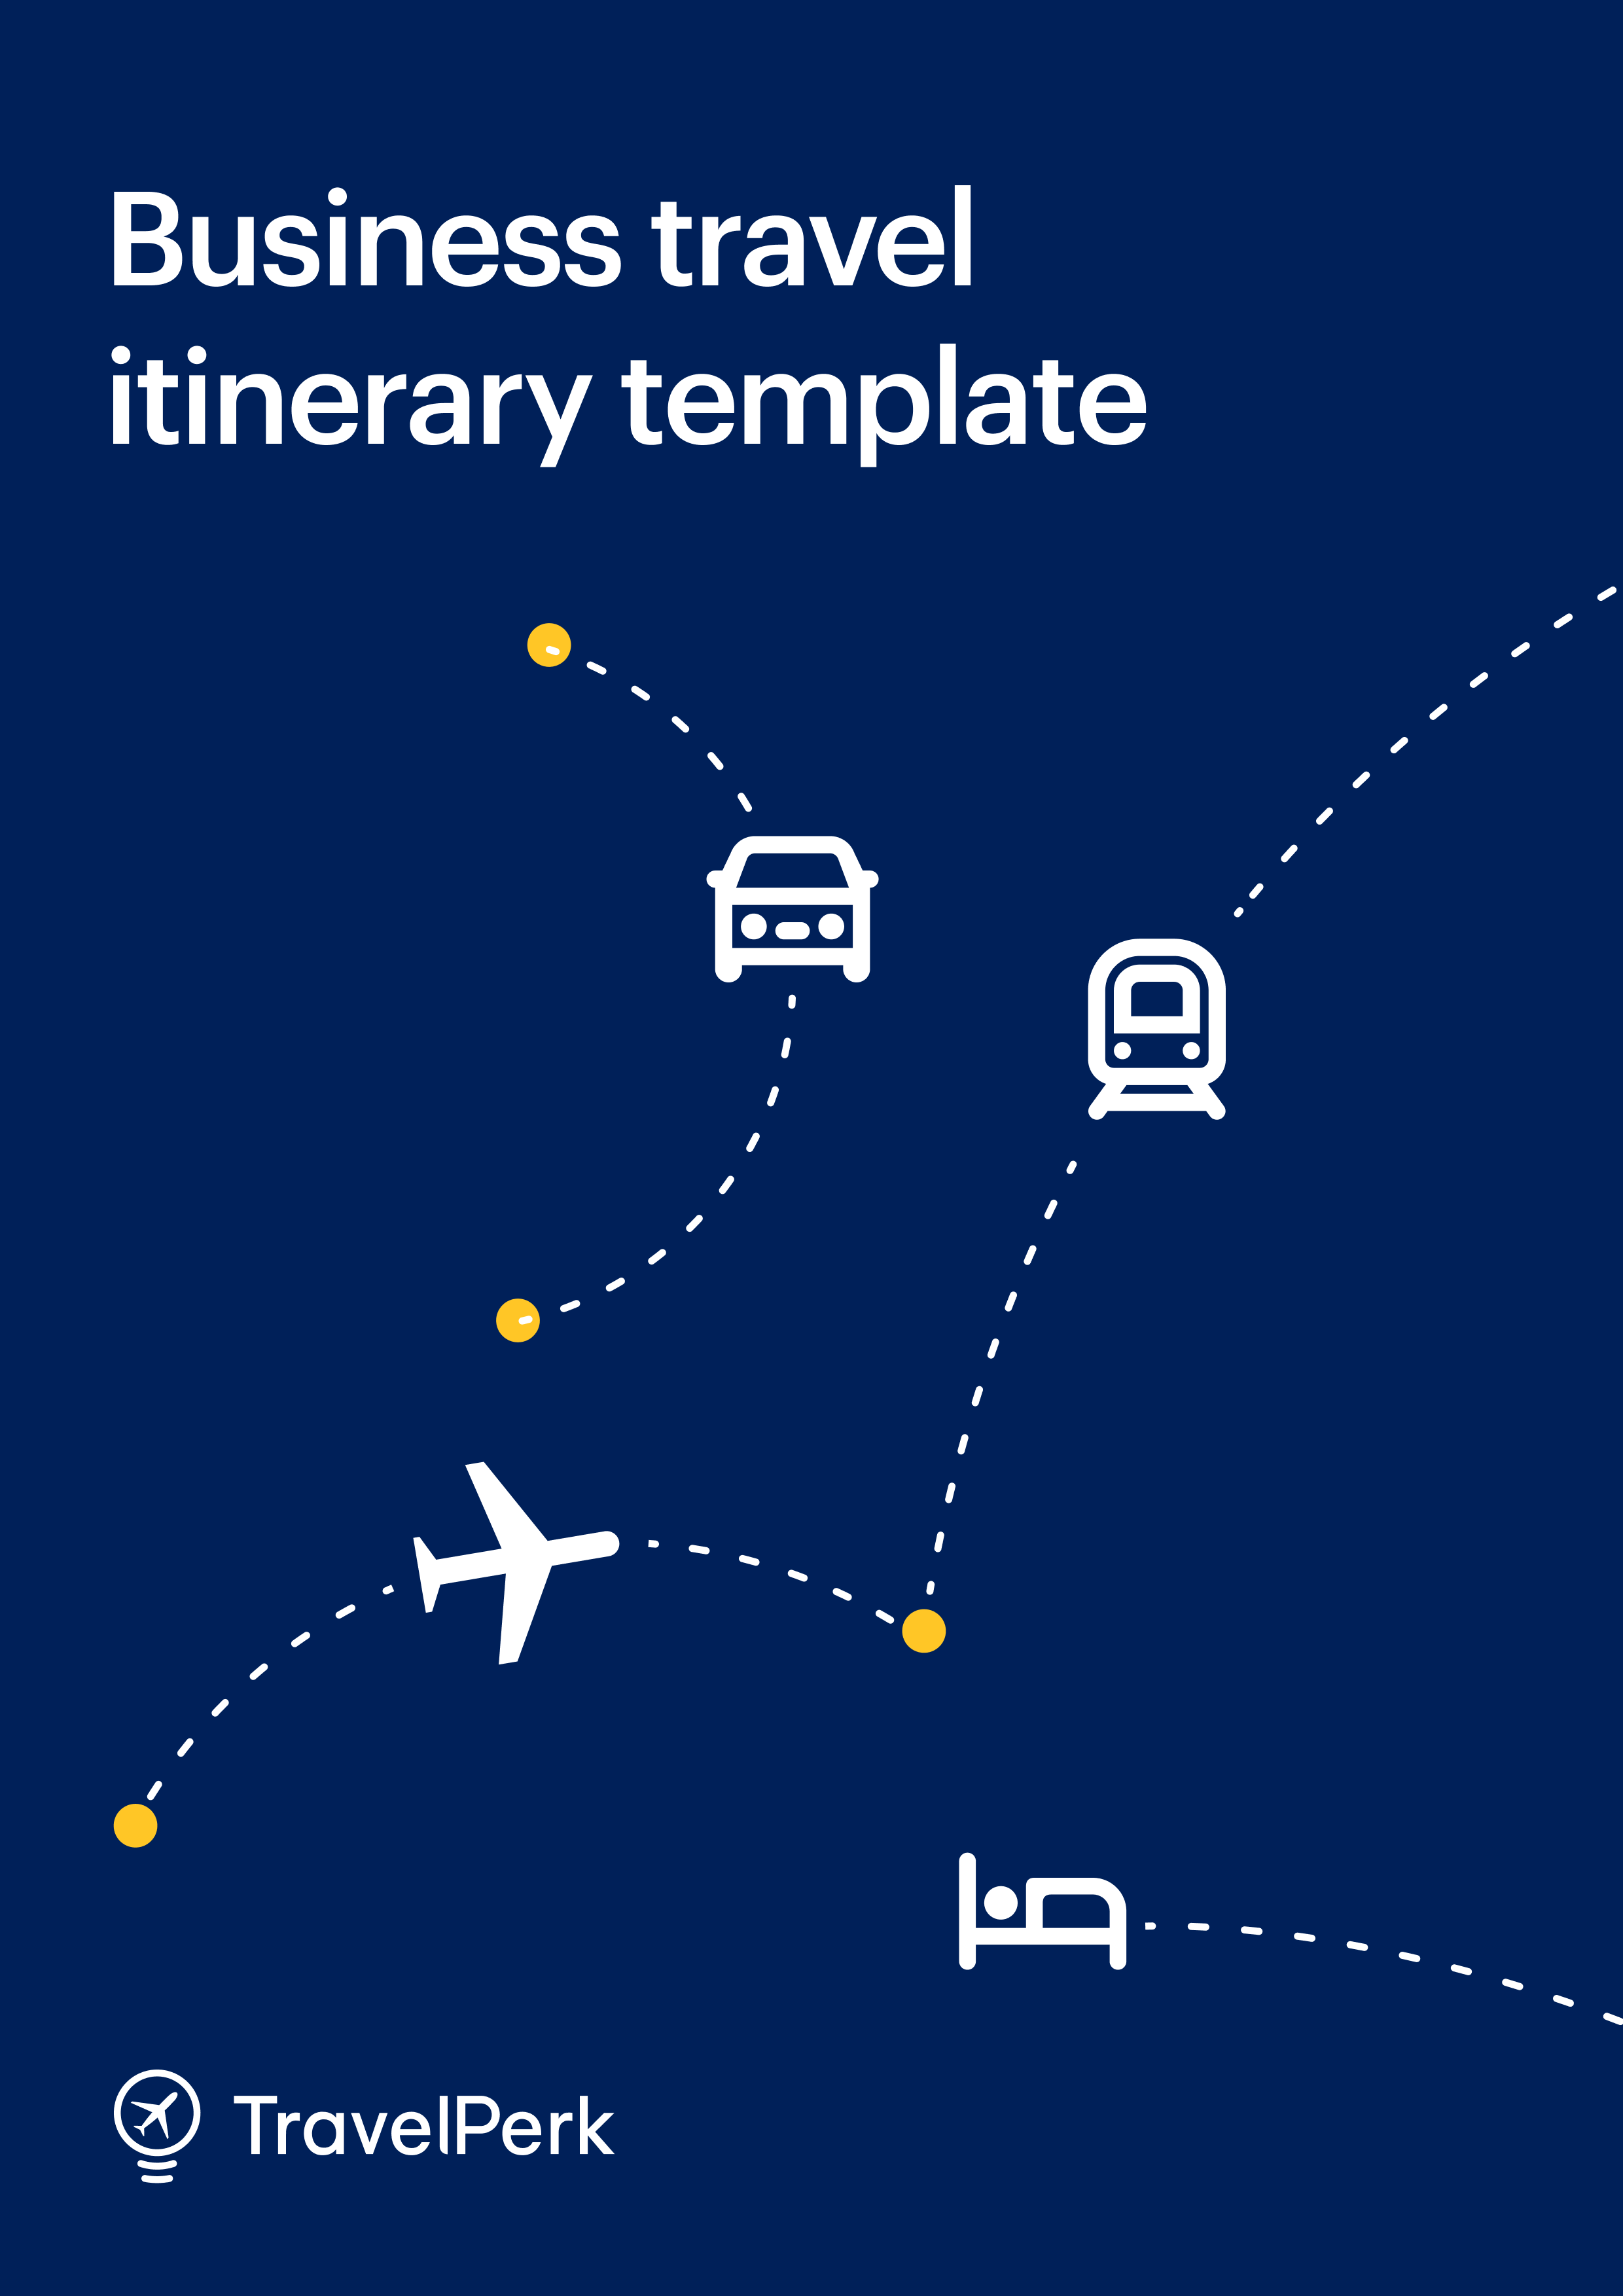 Business travel itinerary template